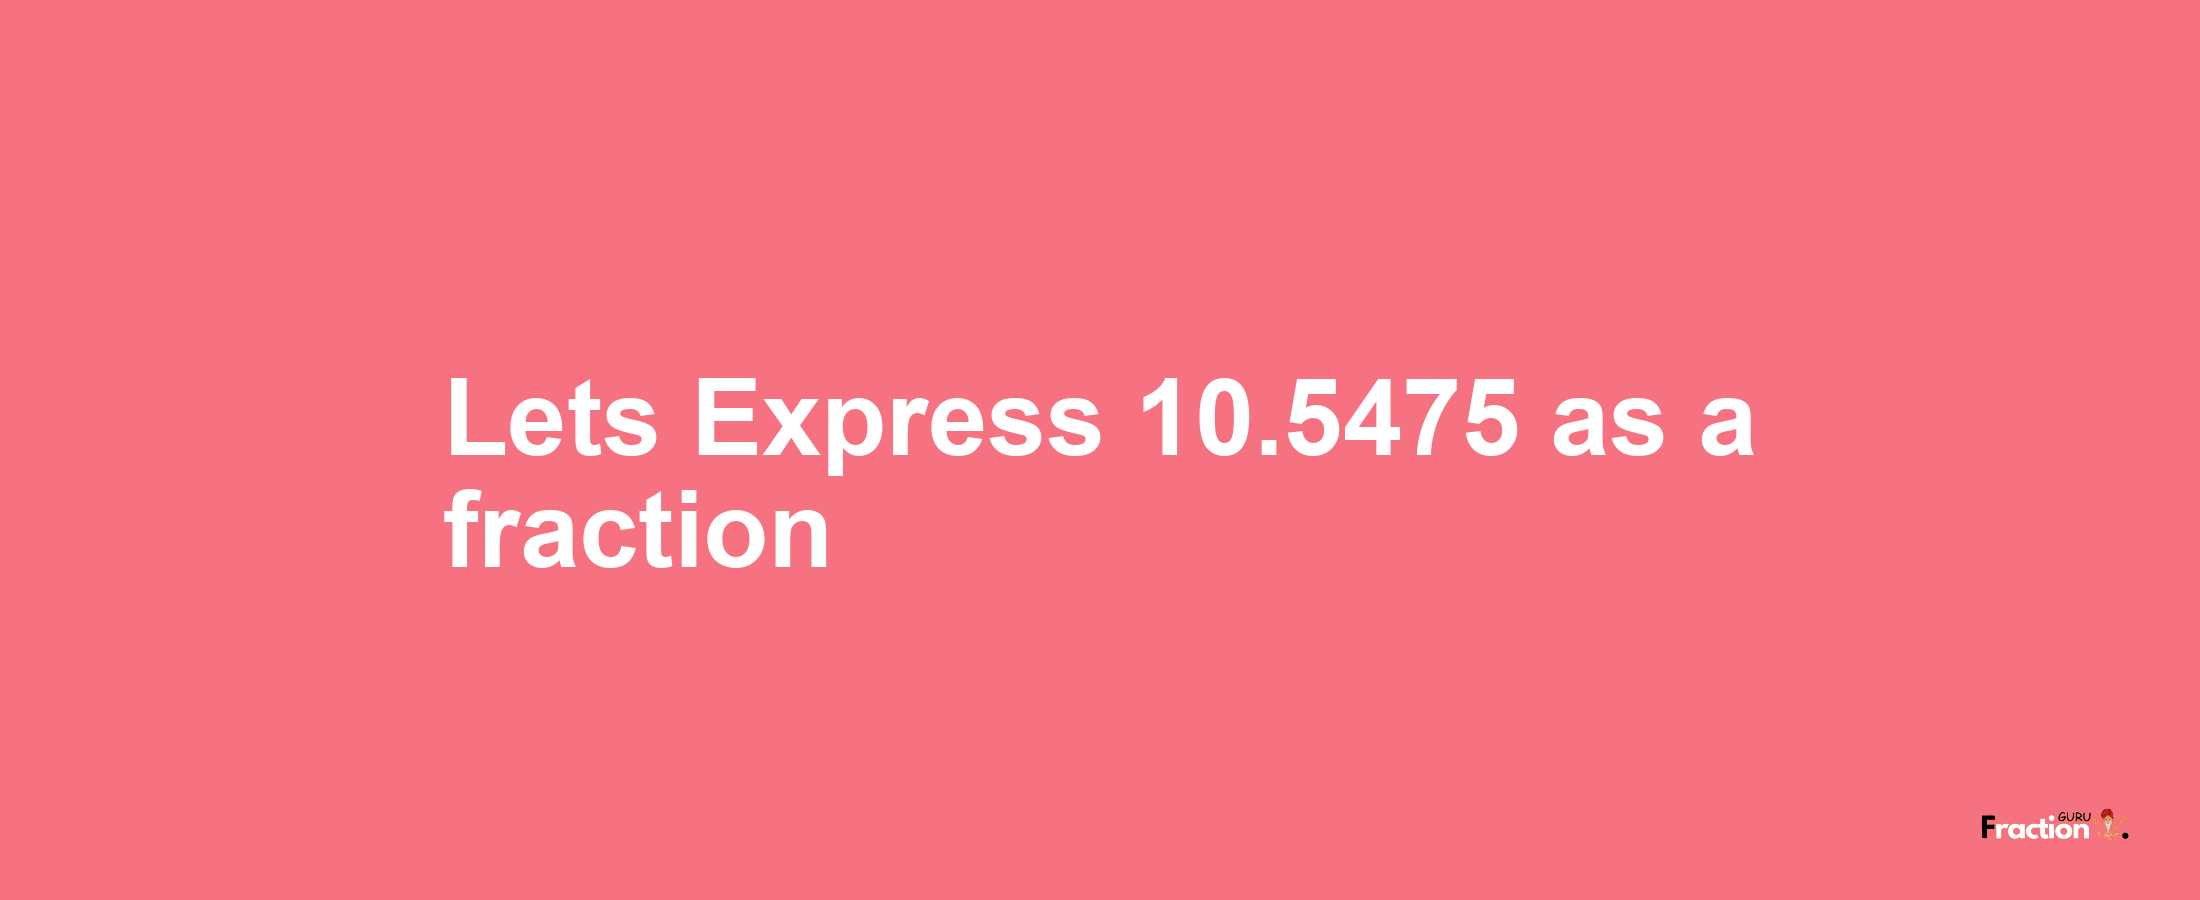 Lets Express 10.5475 as afraction